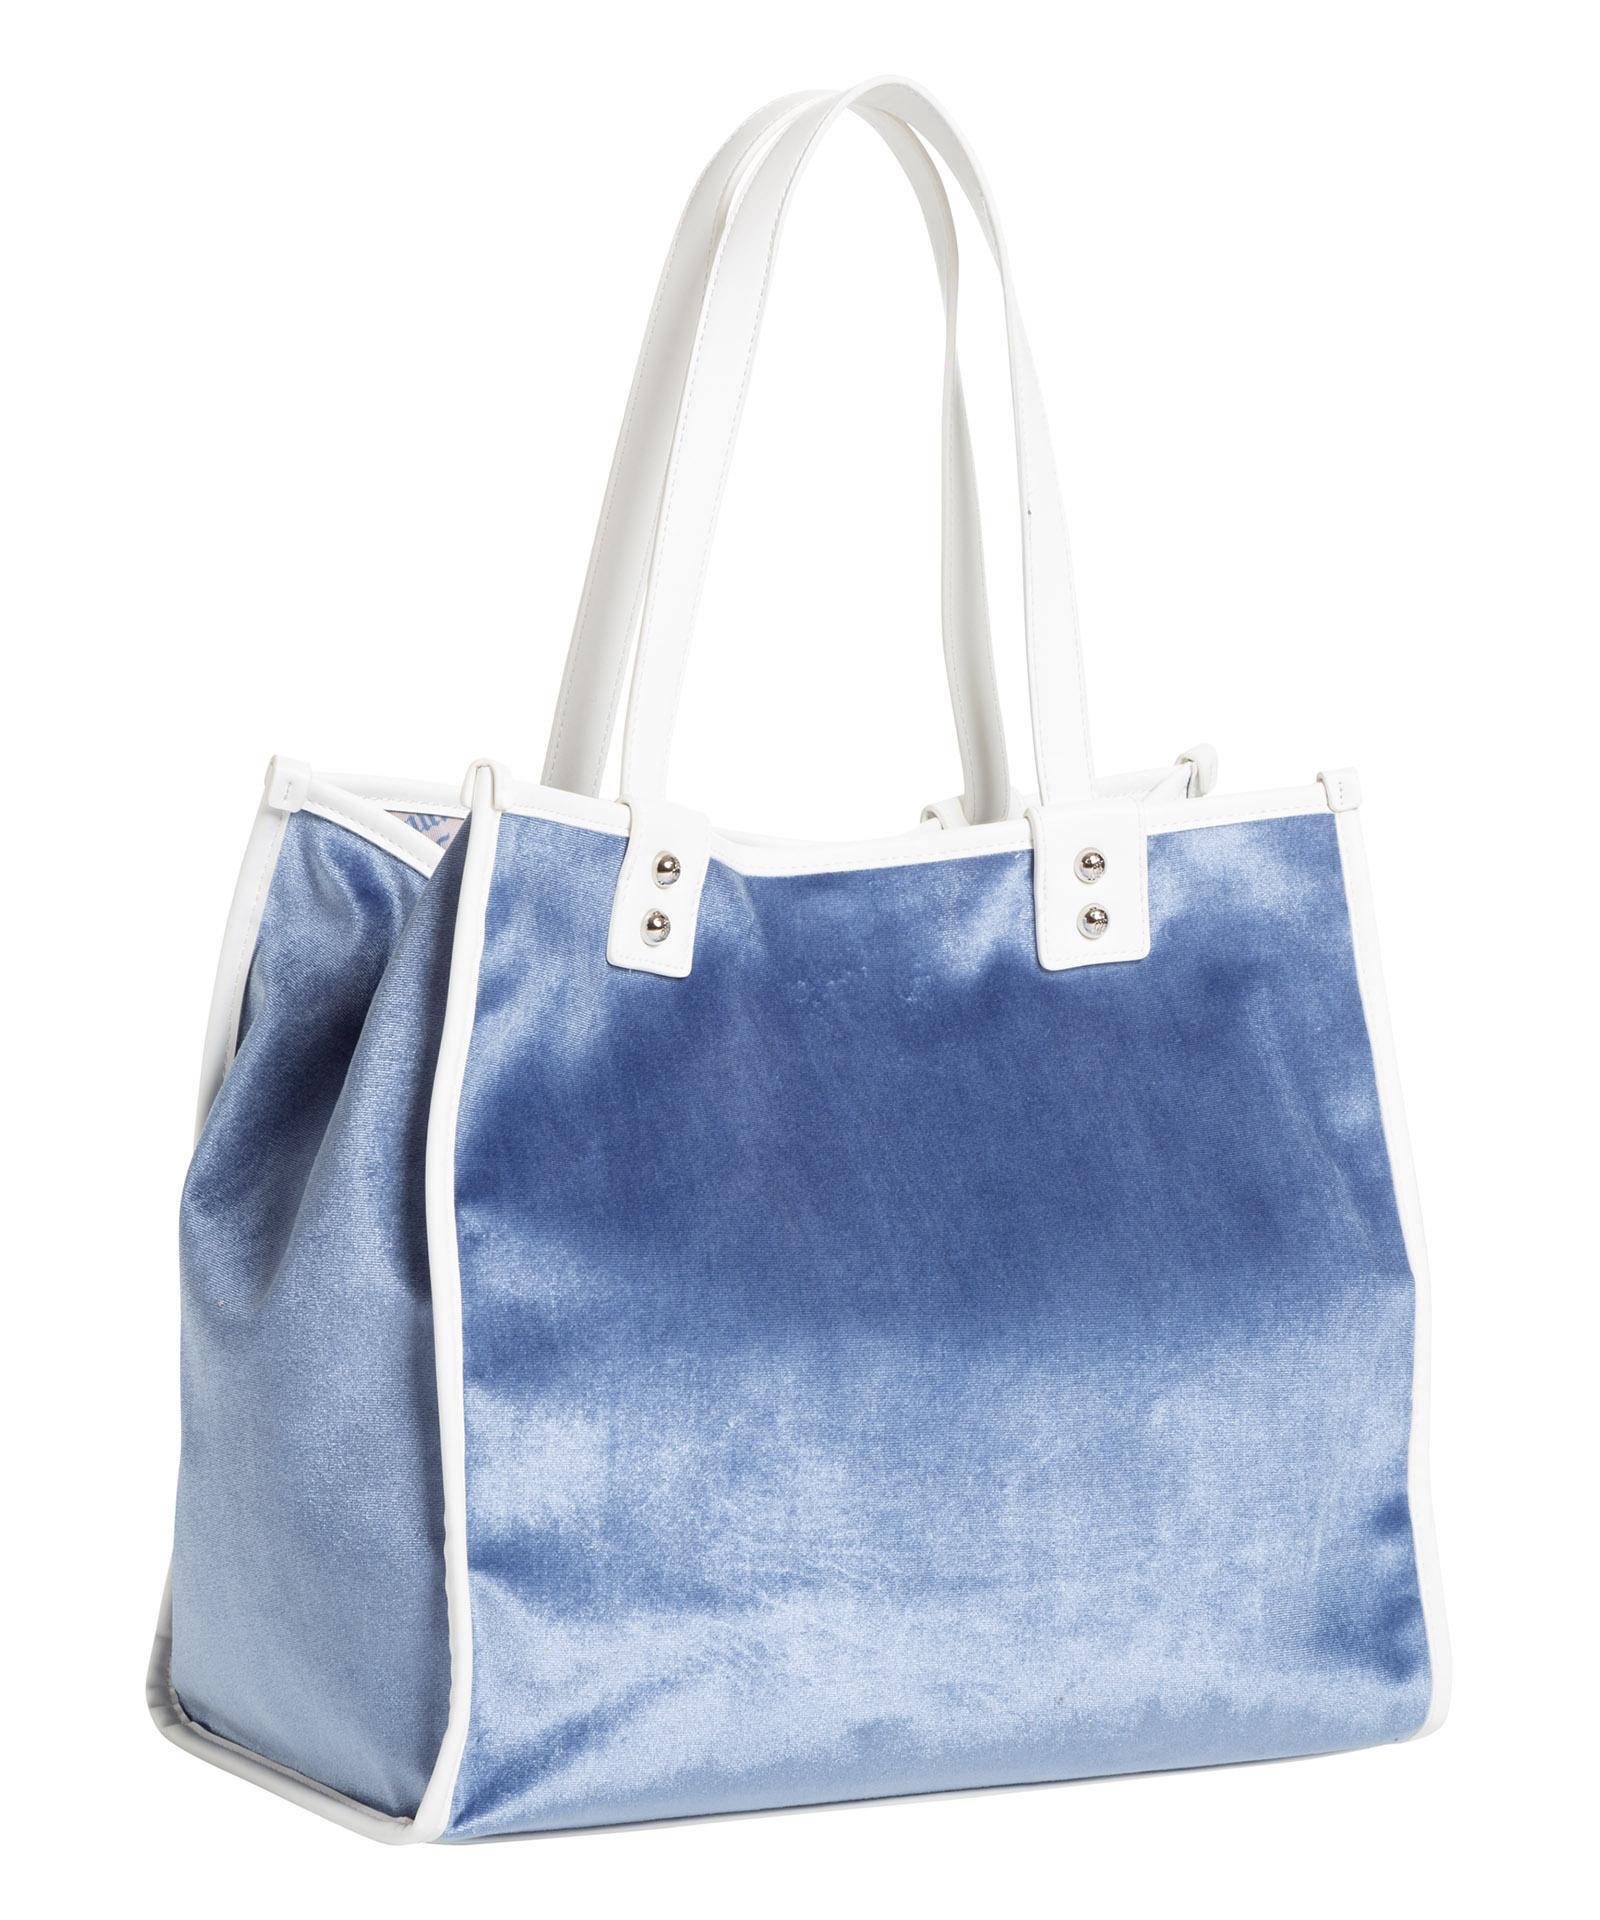 Juicy Couture Tote Bag in Blue | Lyst